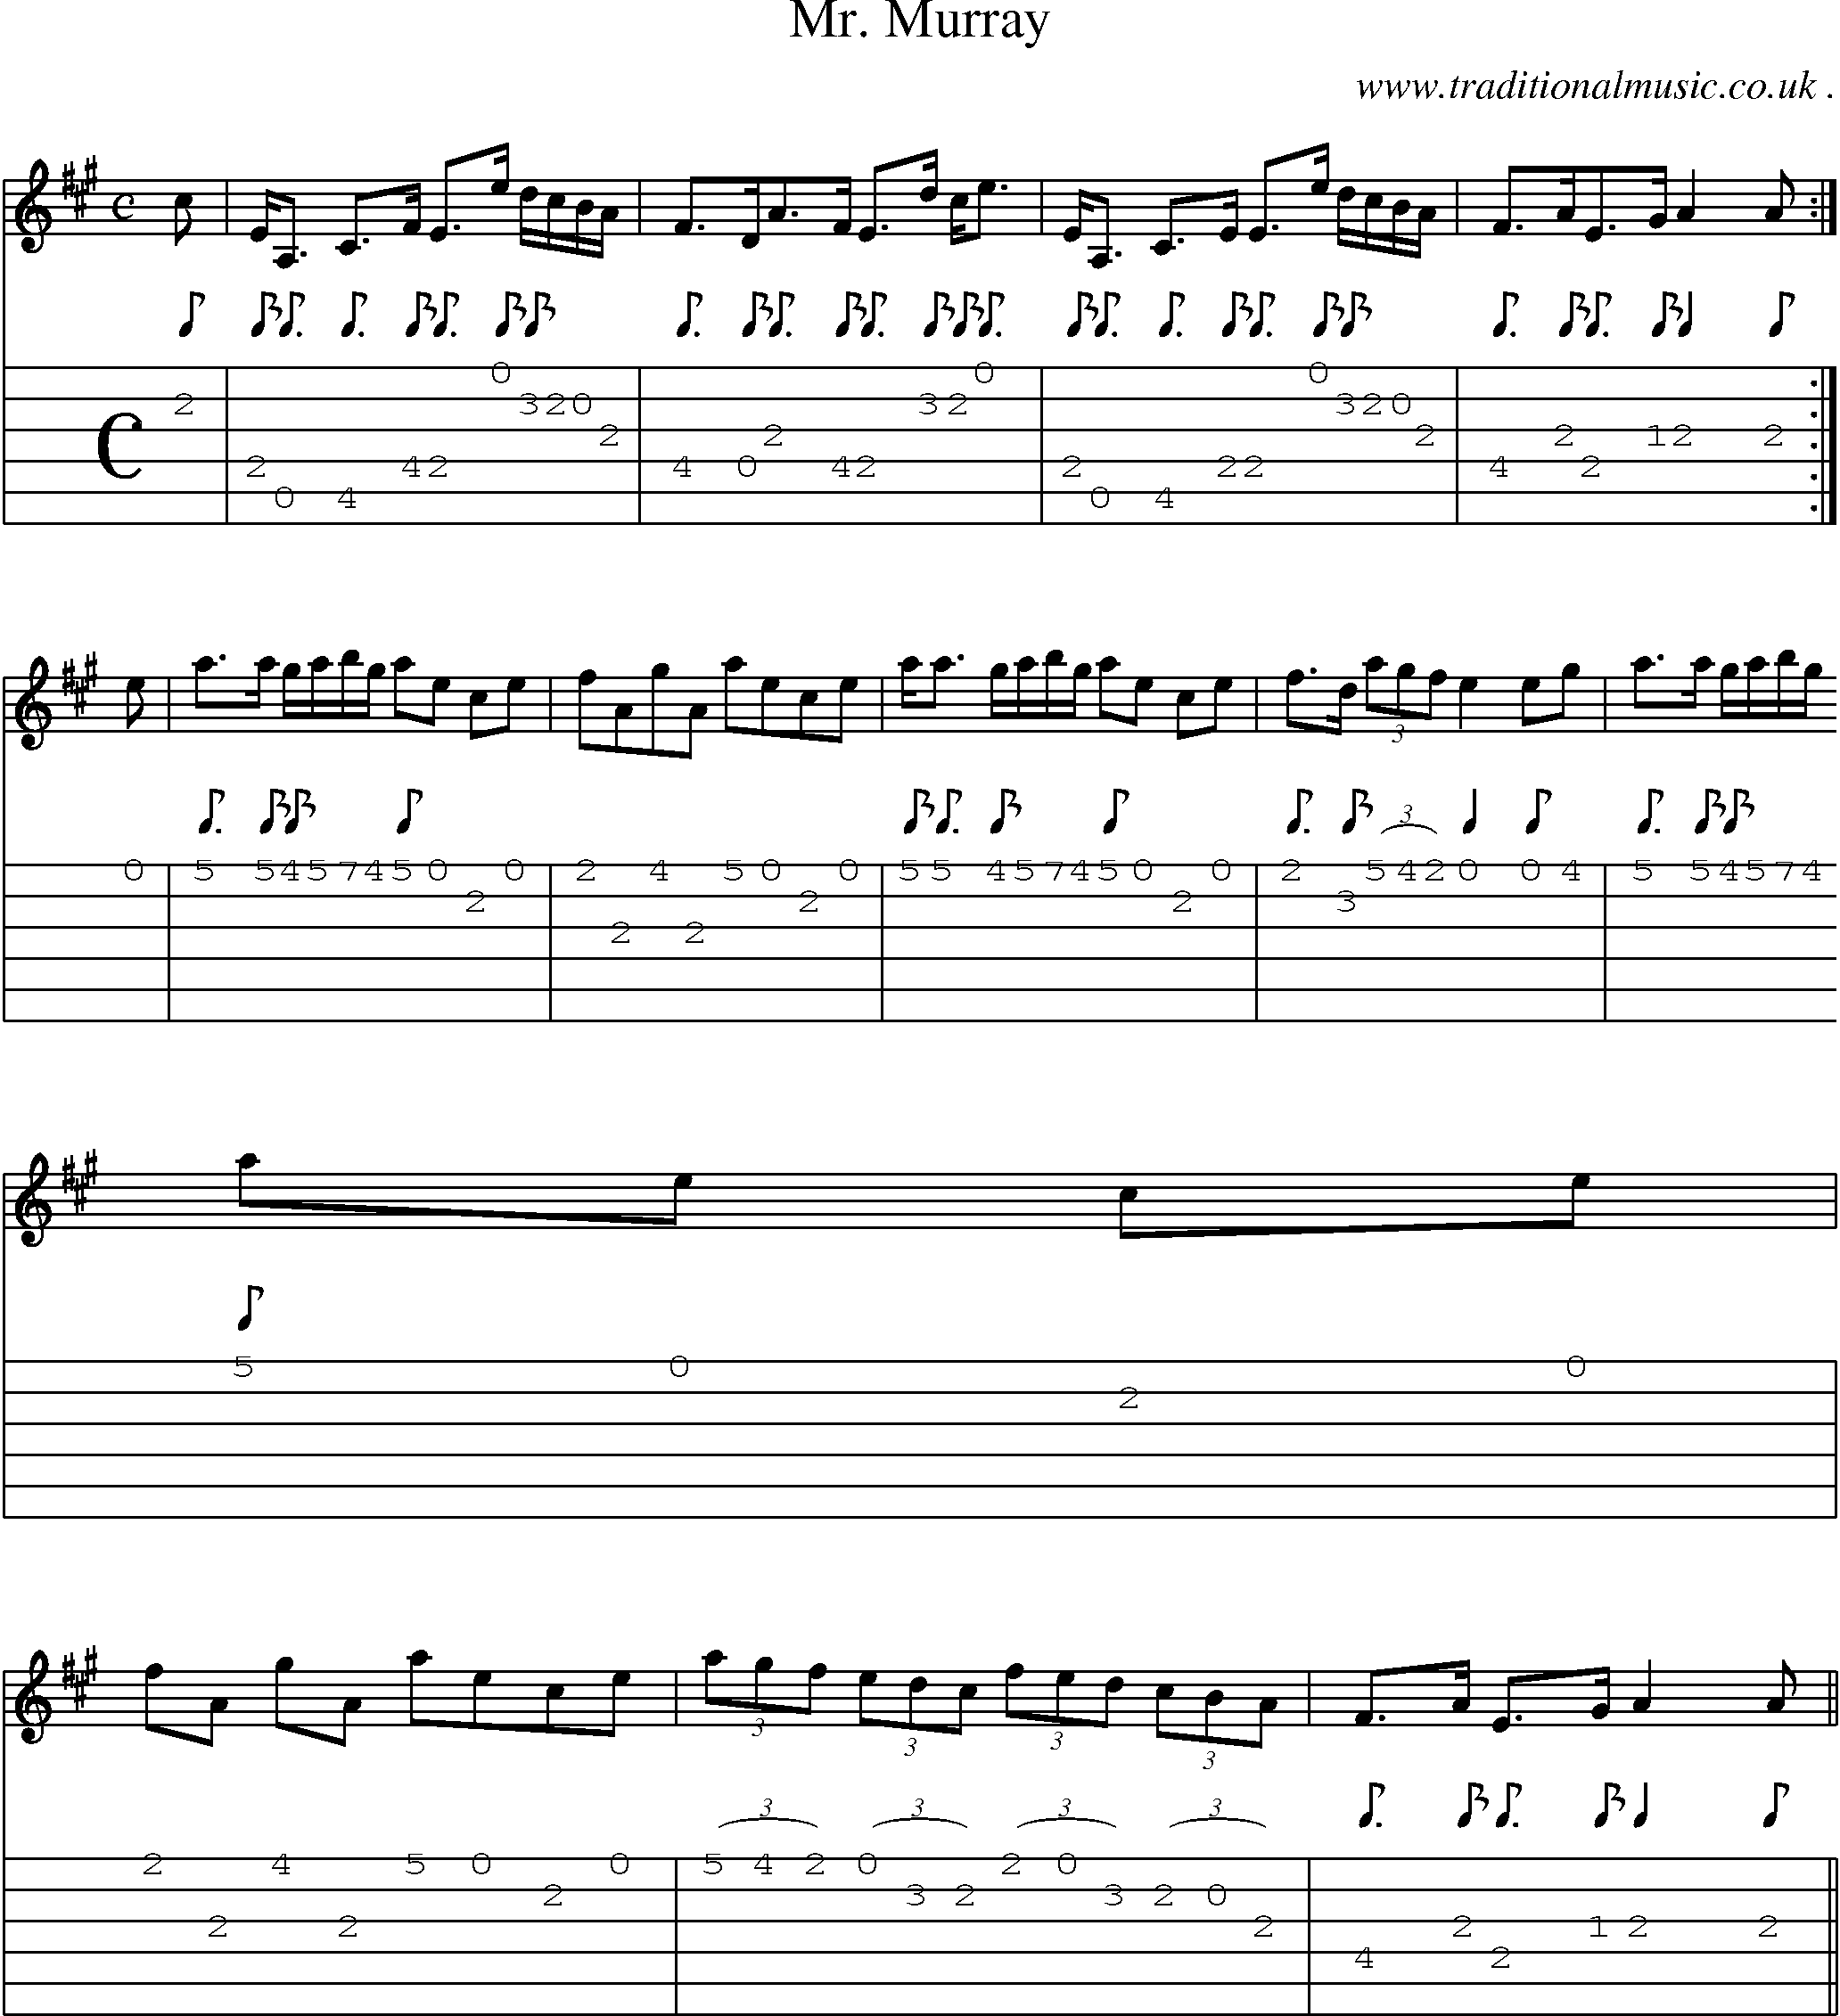 Sheet-music  score, Chords and Guitar Tabs for Mr Murray